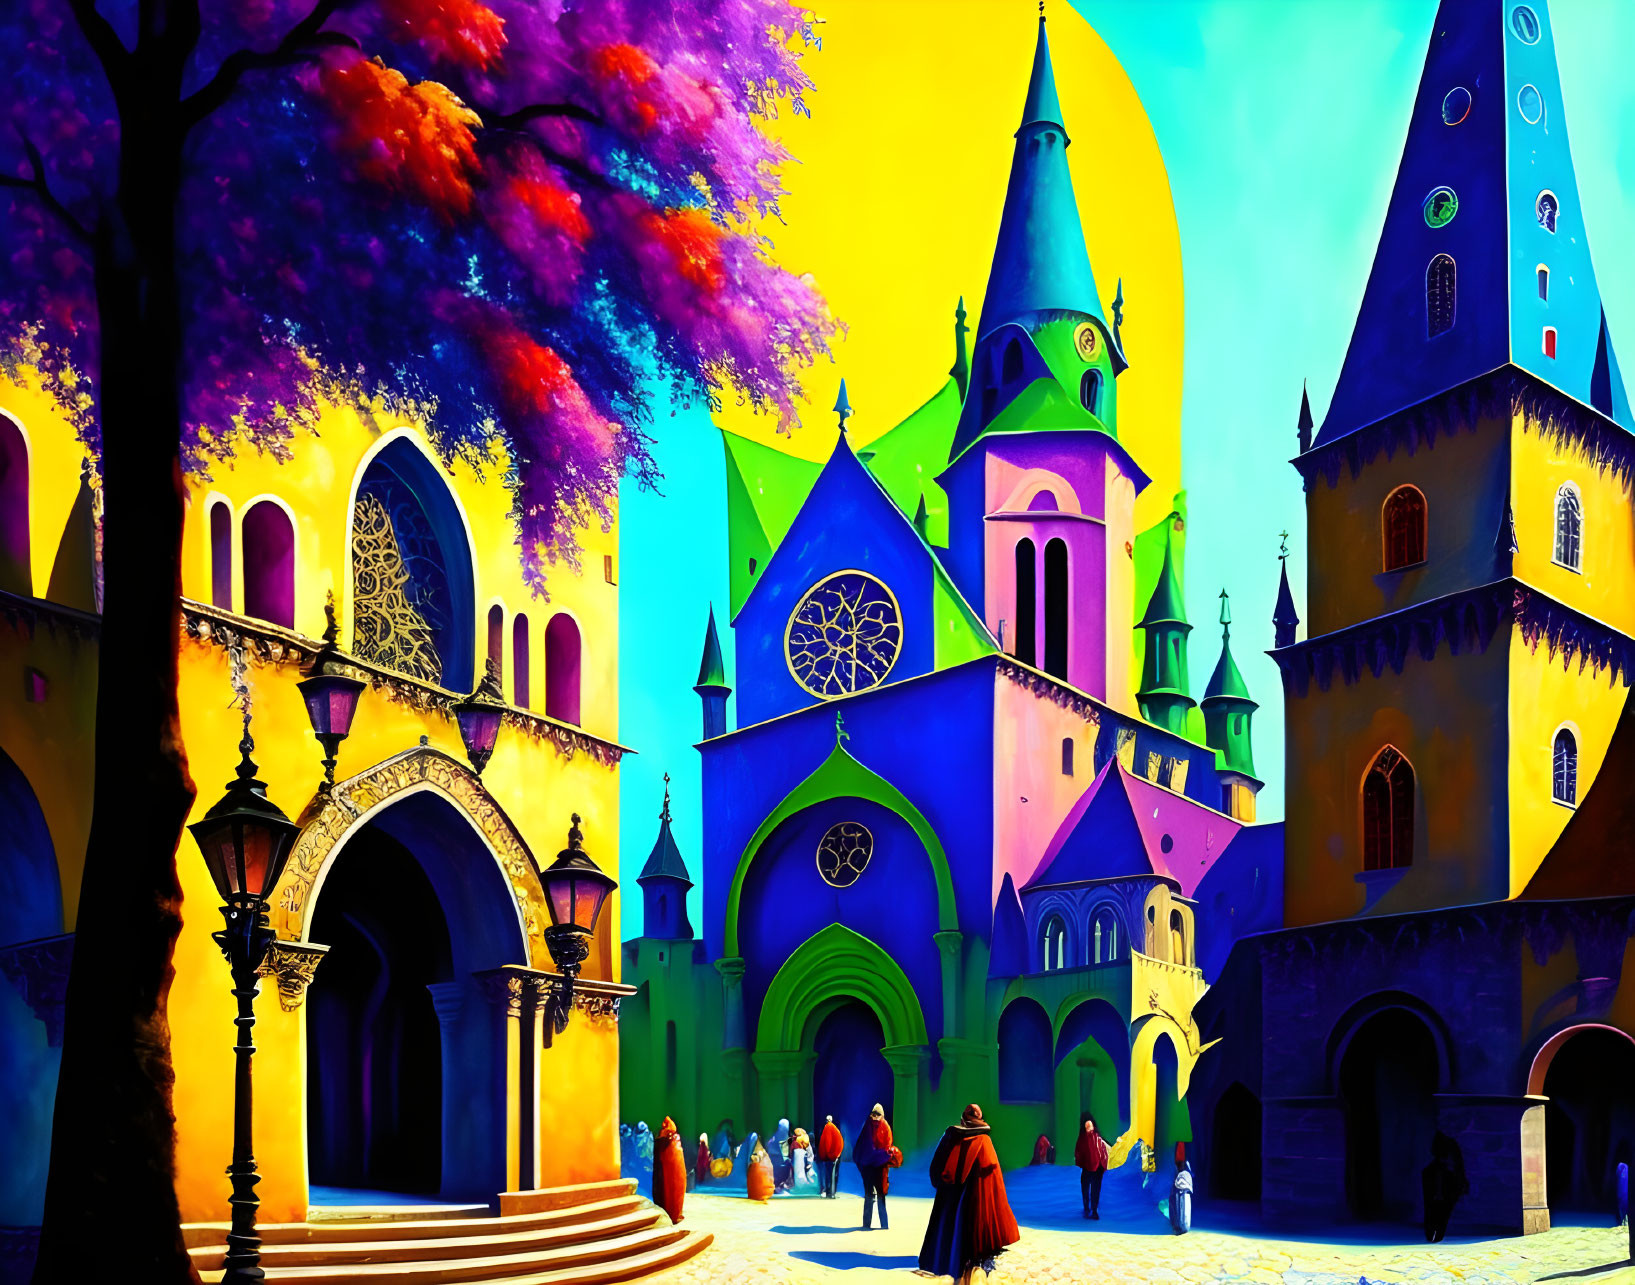 Colorful Medieval Town Square with People, Trees, and Whimsical Buildings